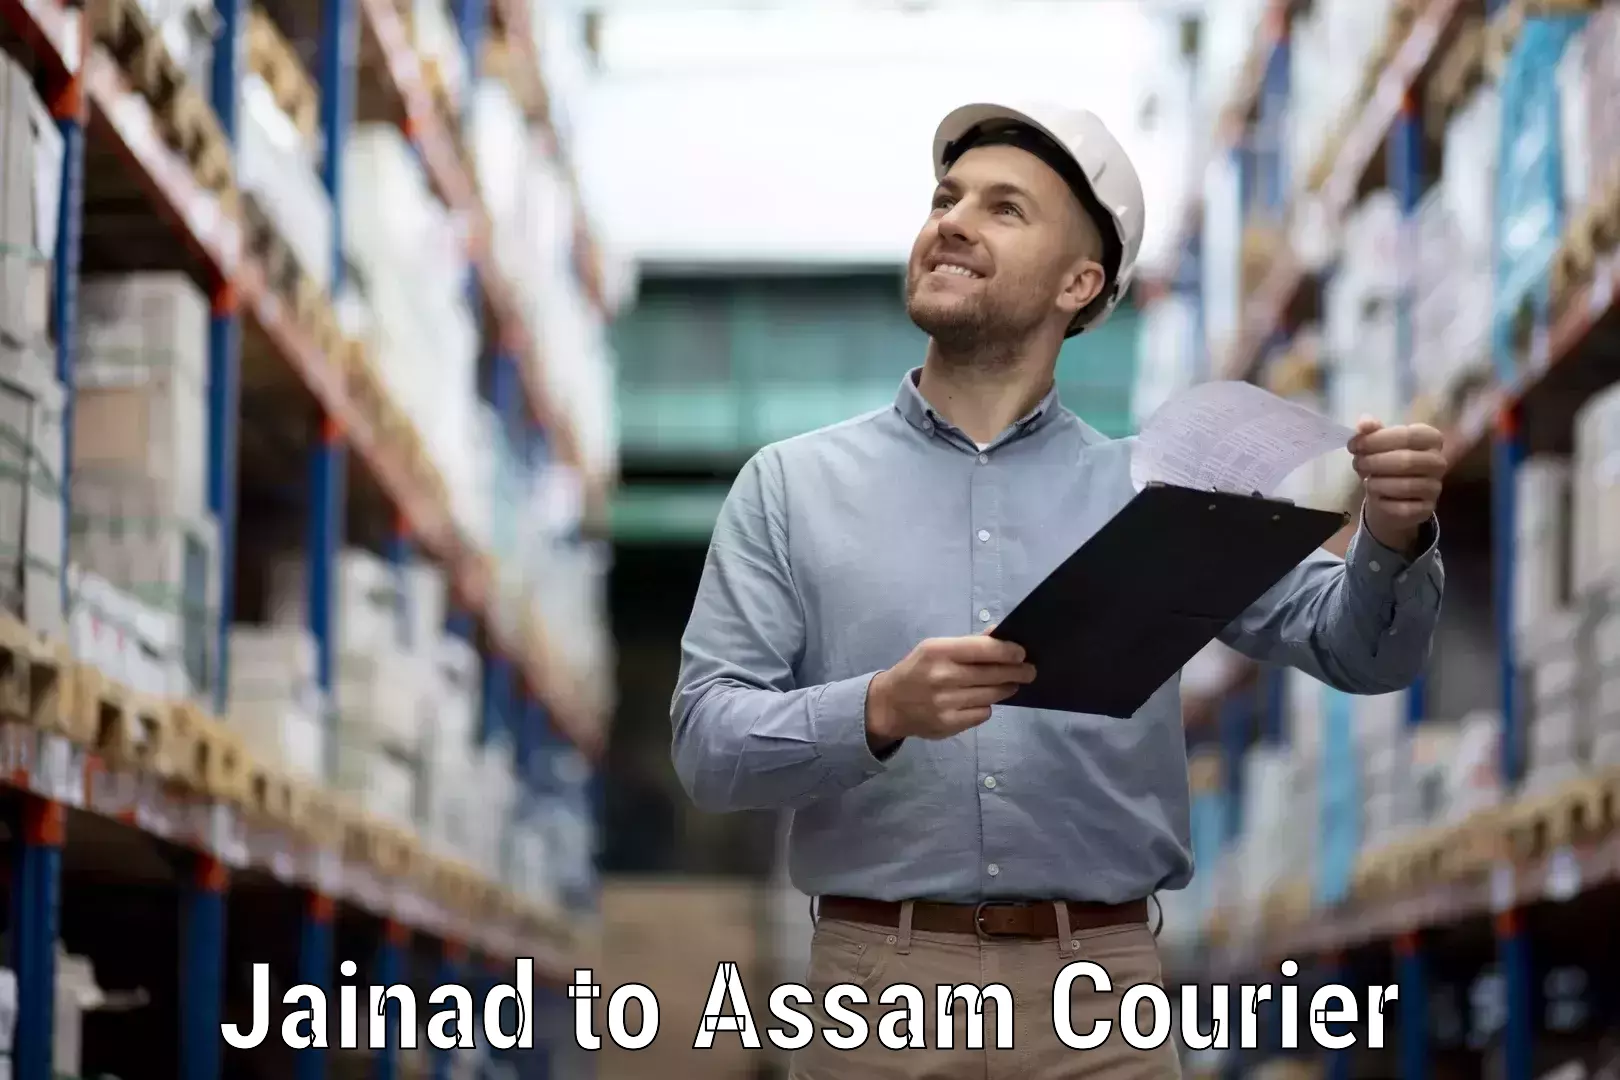 Discount courier rates Jainad to Lala Assam